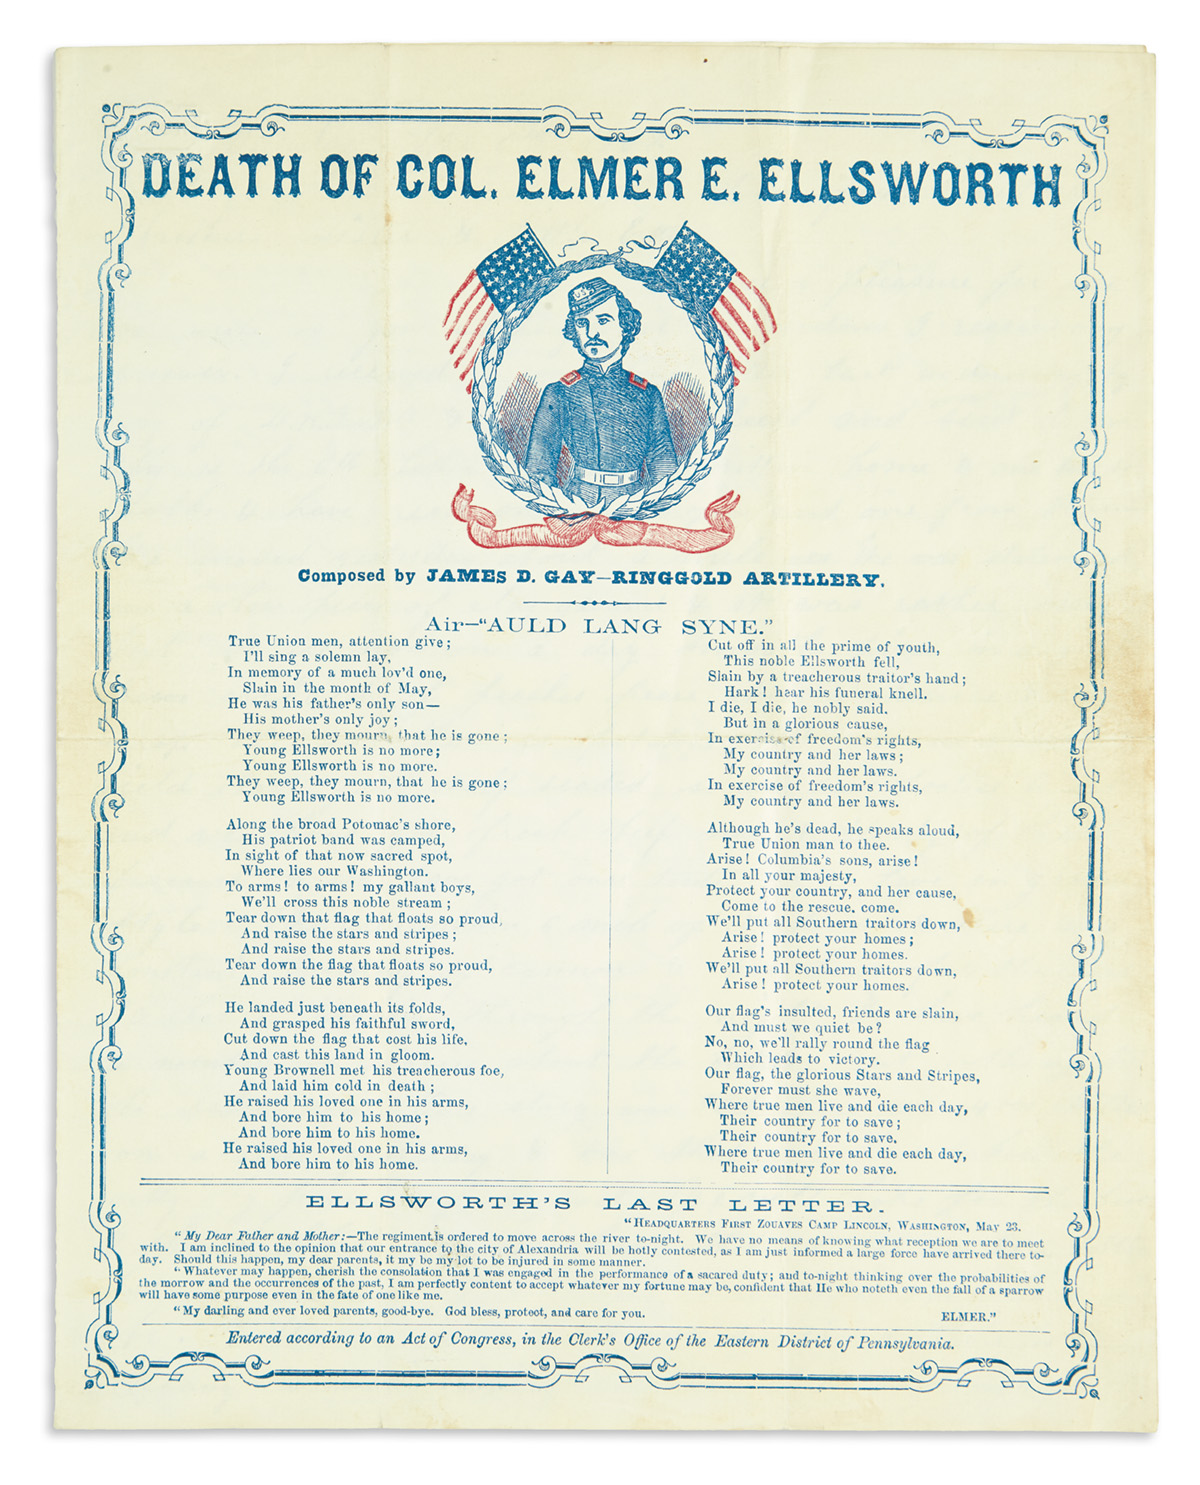 (CIVIL WAR.) Group of ephemera relating to Colonel Elmer E. Ellsworth, the first to die in the war.